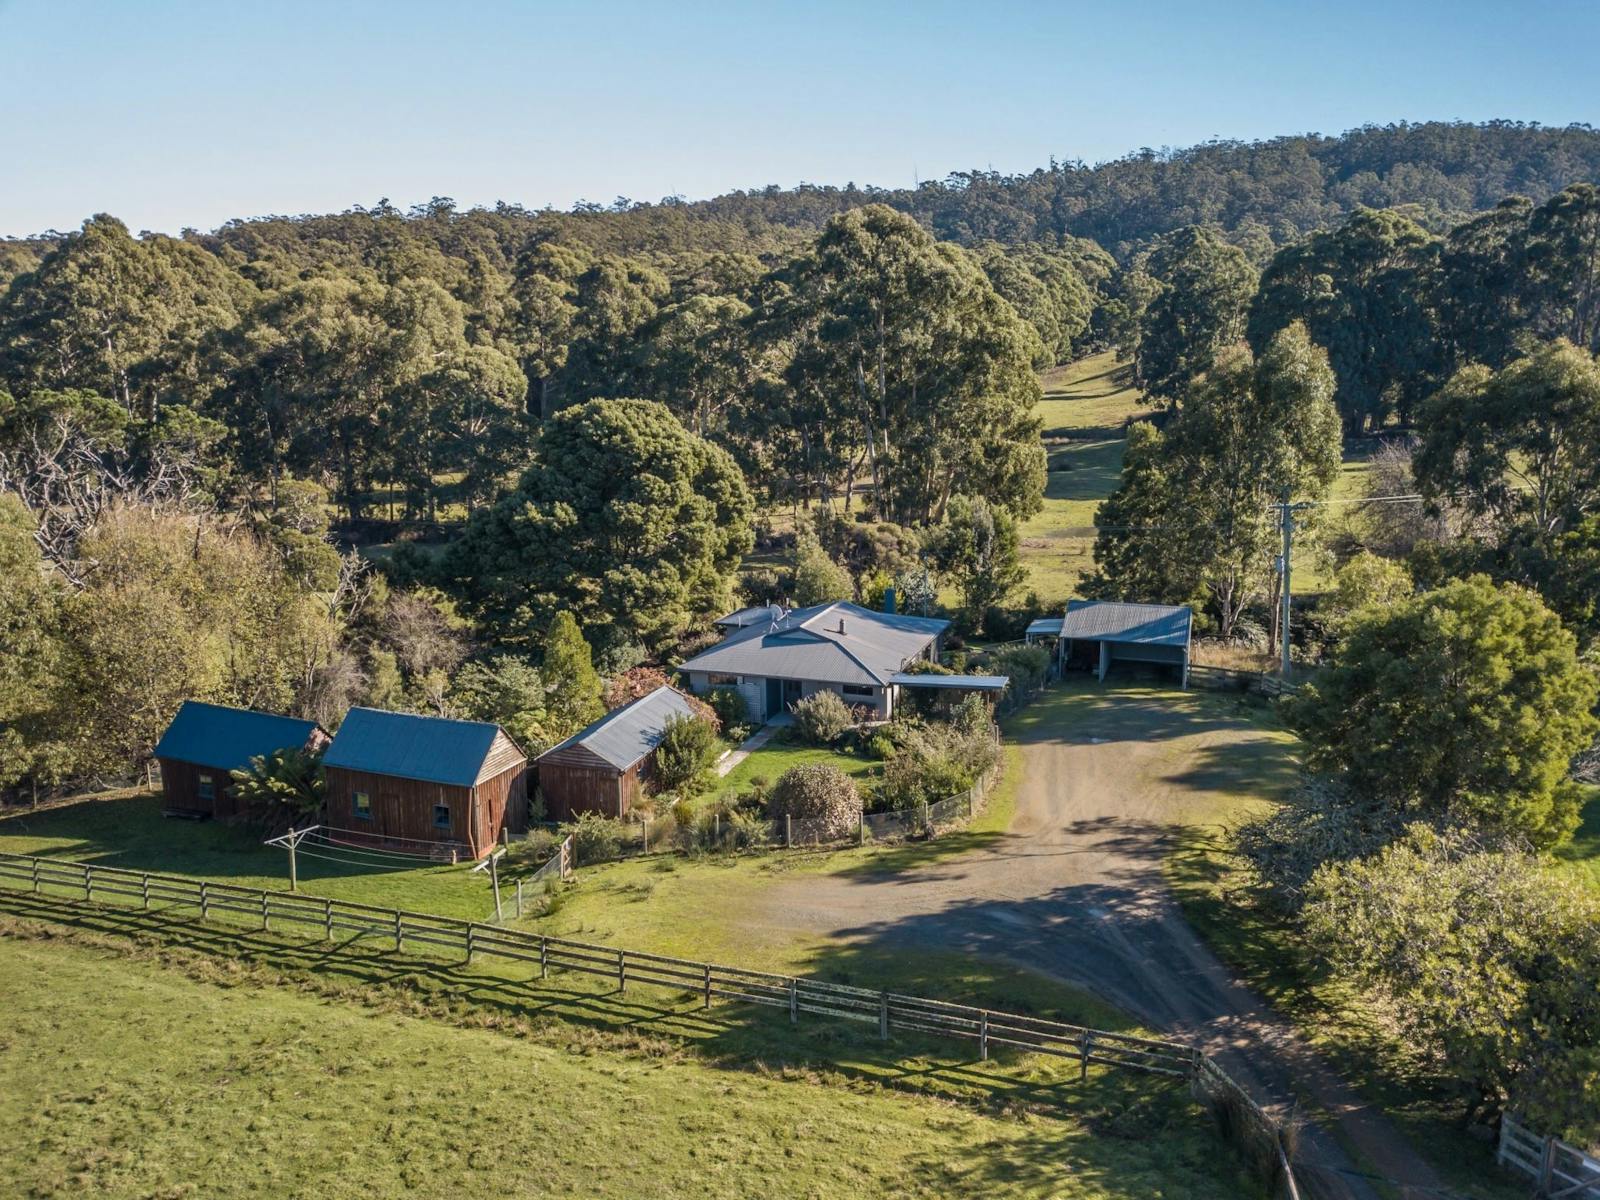 Inala Cottages